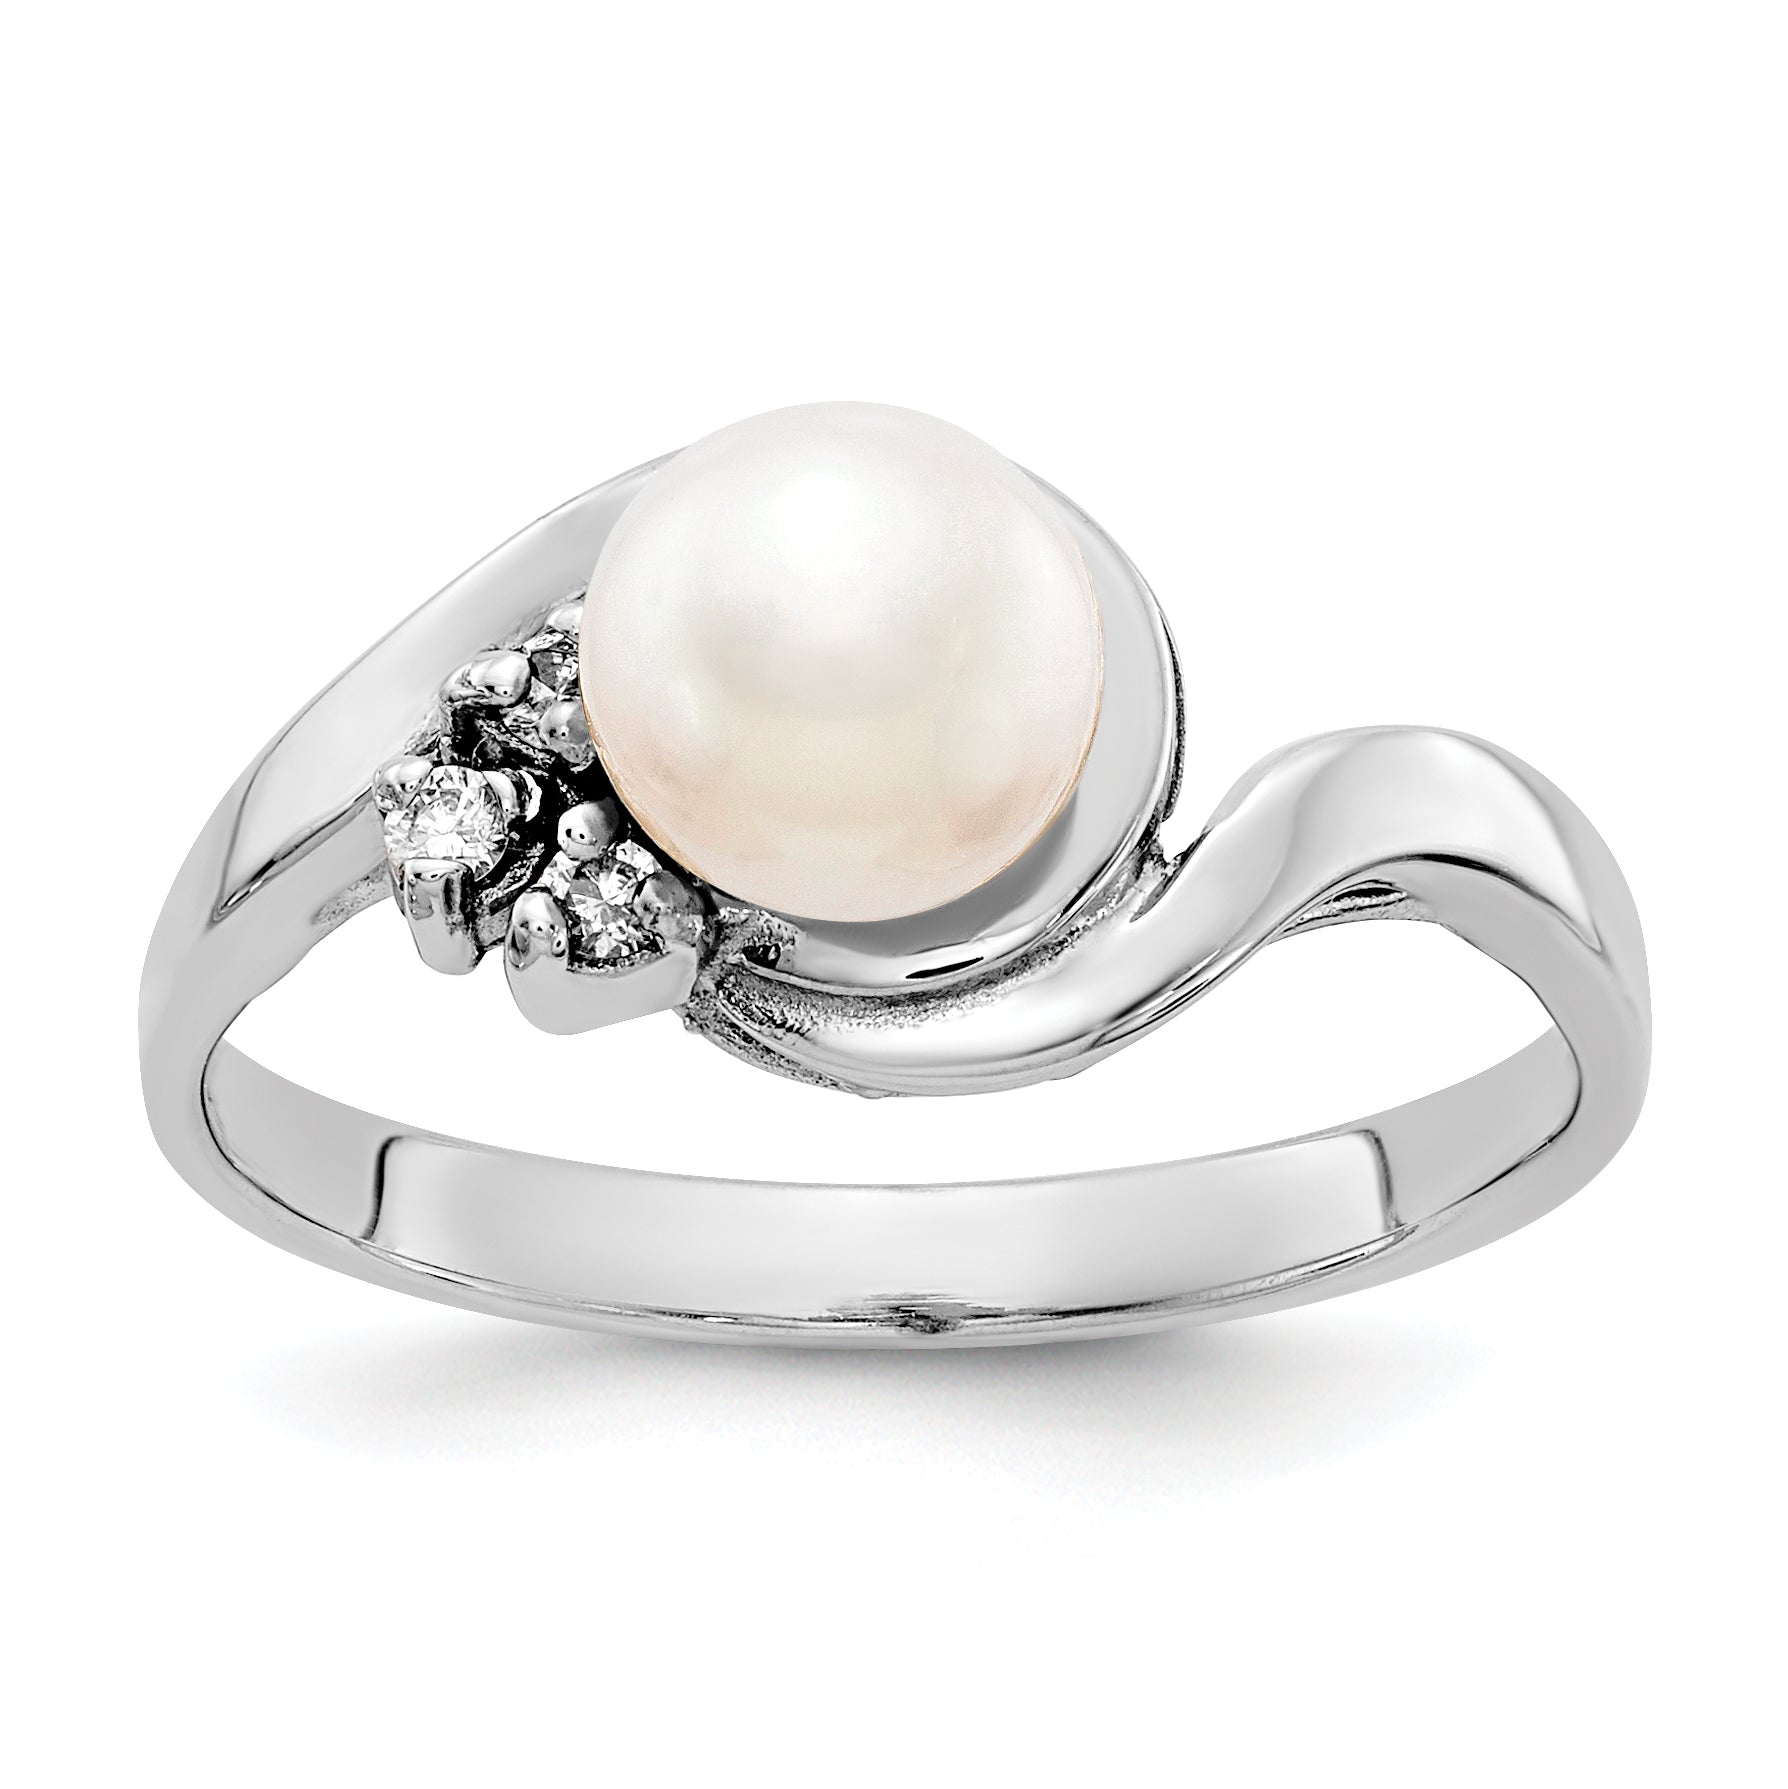 14k White Gold 6mm Fresh Water Cultured Pearl AA Diamond Ring